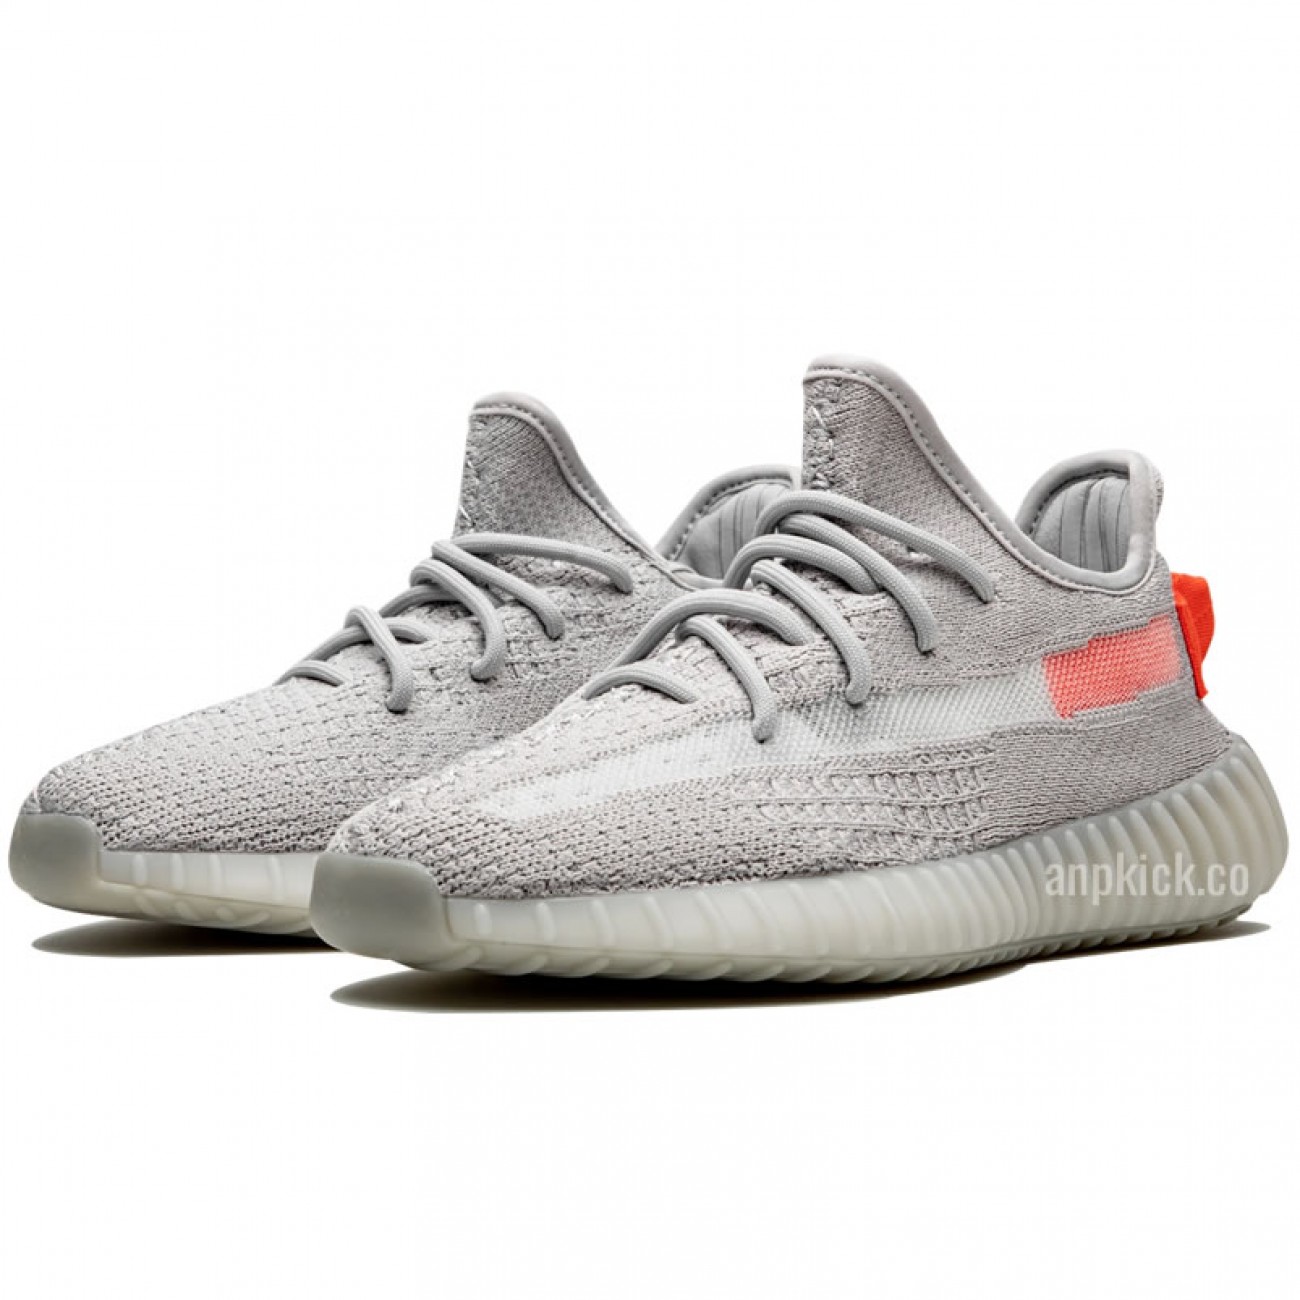 adidas Yeezy Boost 350 V2 "Tail Light" FX9017 New Release Date